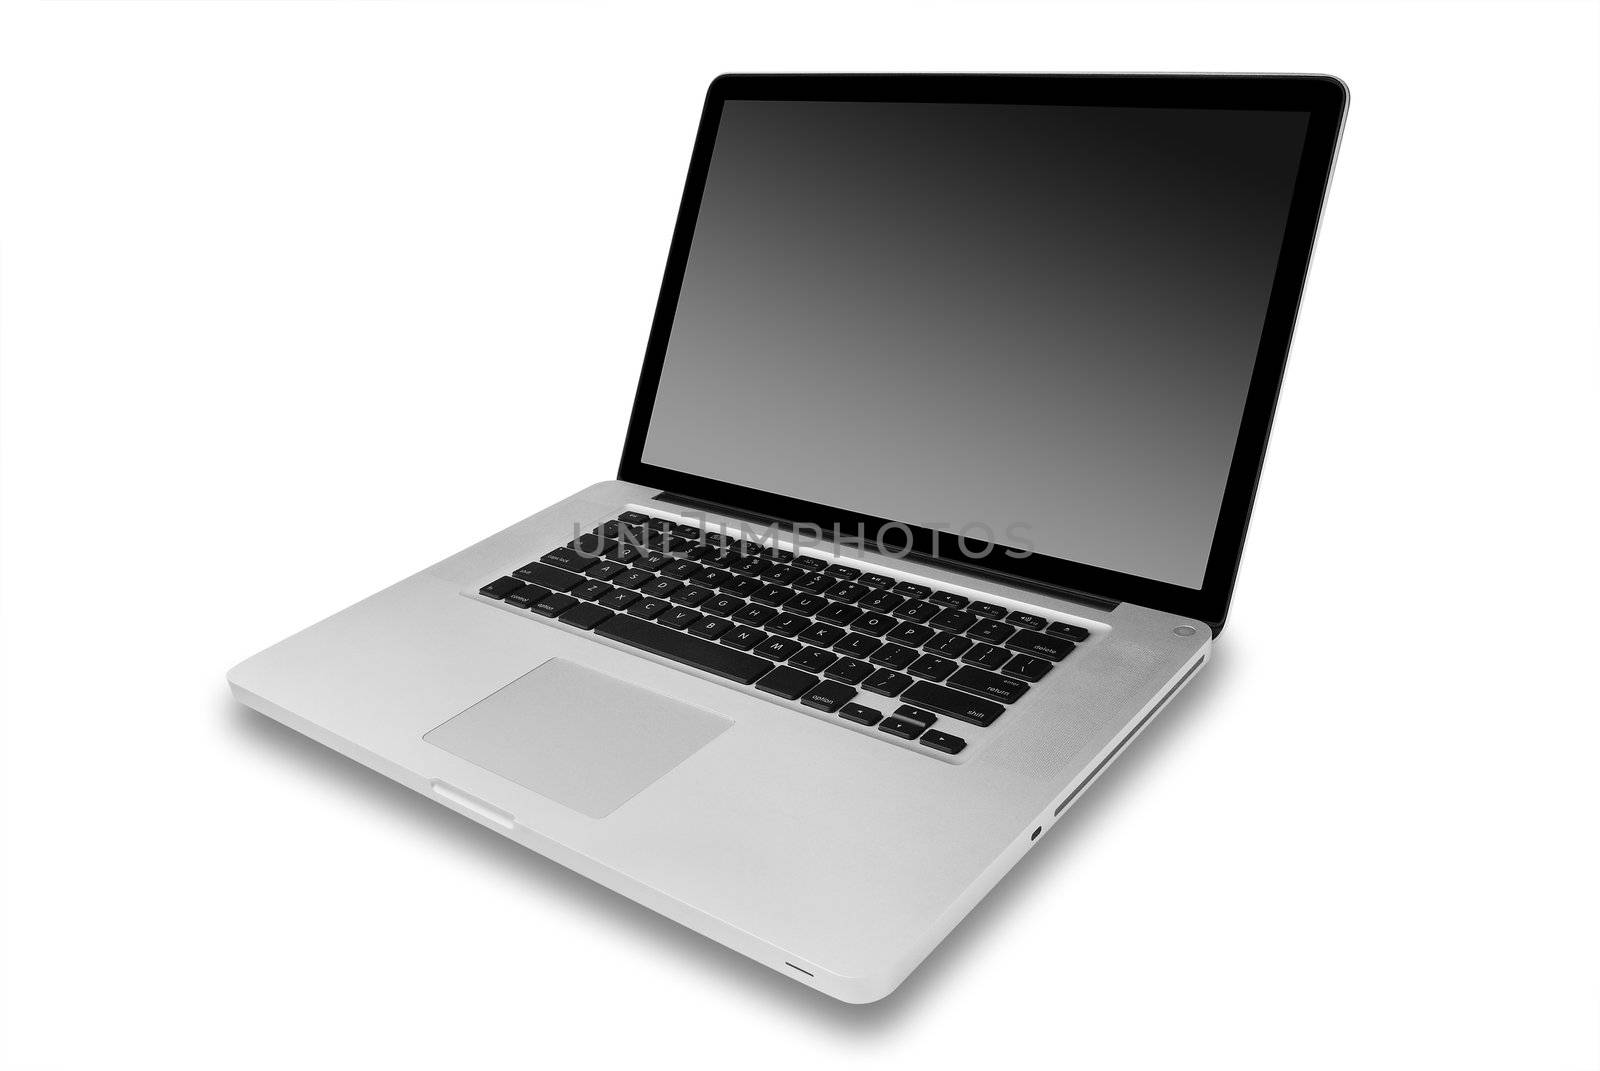 Modern laptop isolated on white with reflections on glass table.